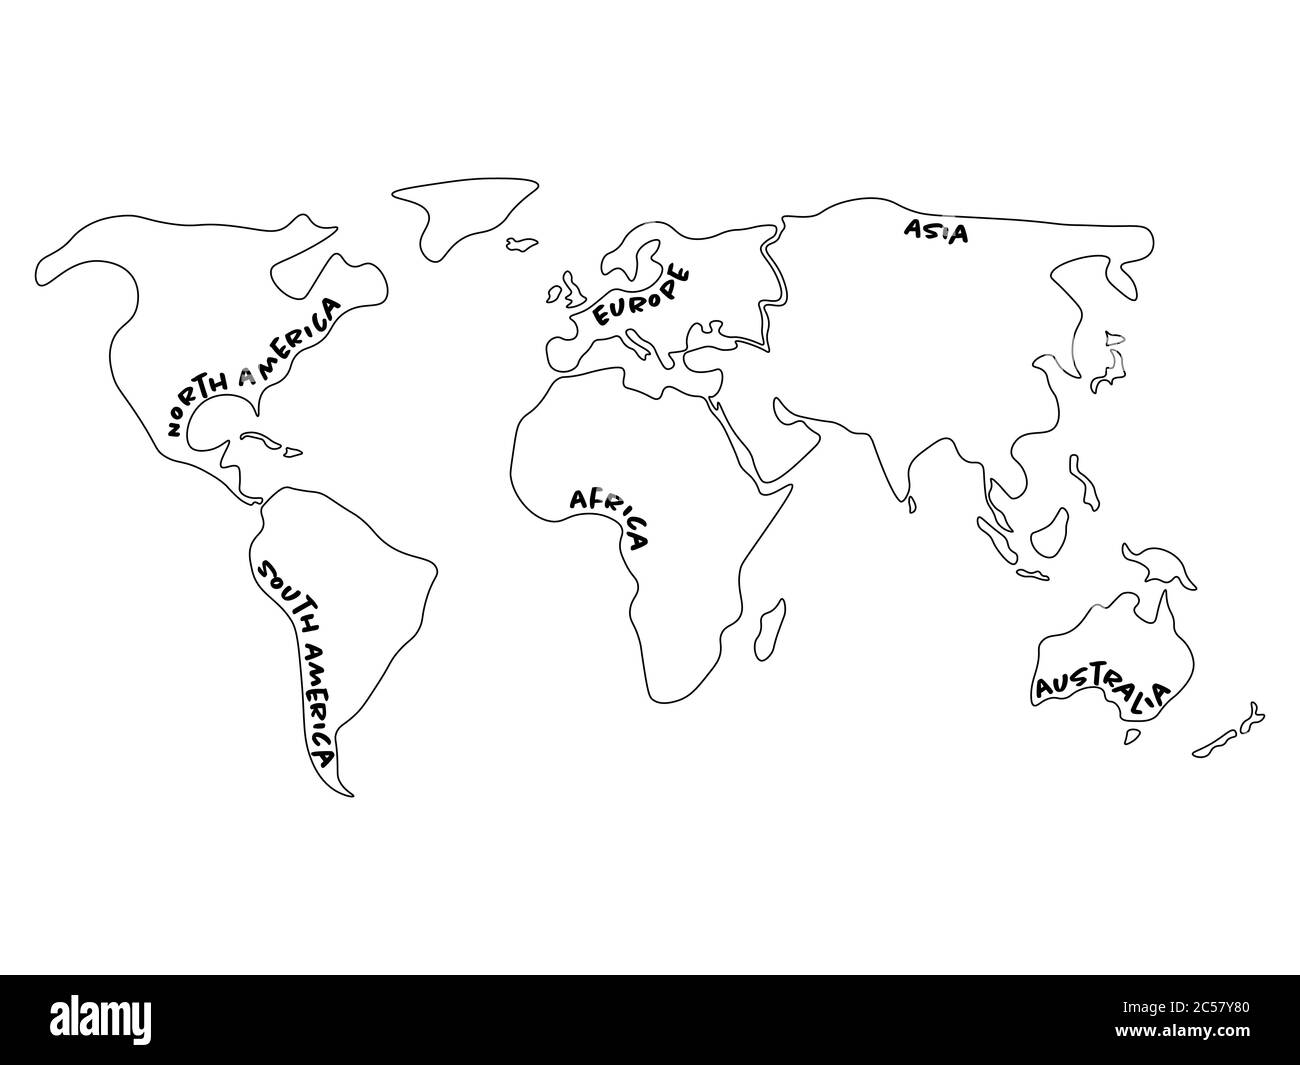 World map divided to six continents - North America, South America, Africa, Europe, Asia and Australia Oceania. Simplified outline vector map with continent name labels curved by borders. Stock Vector